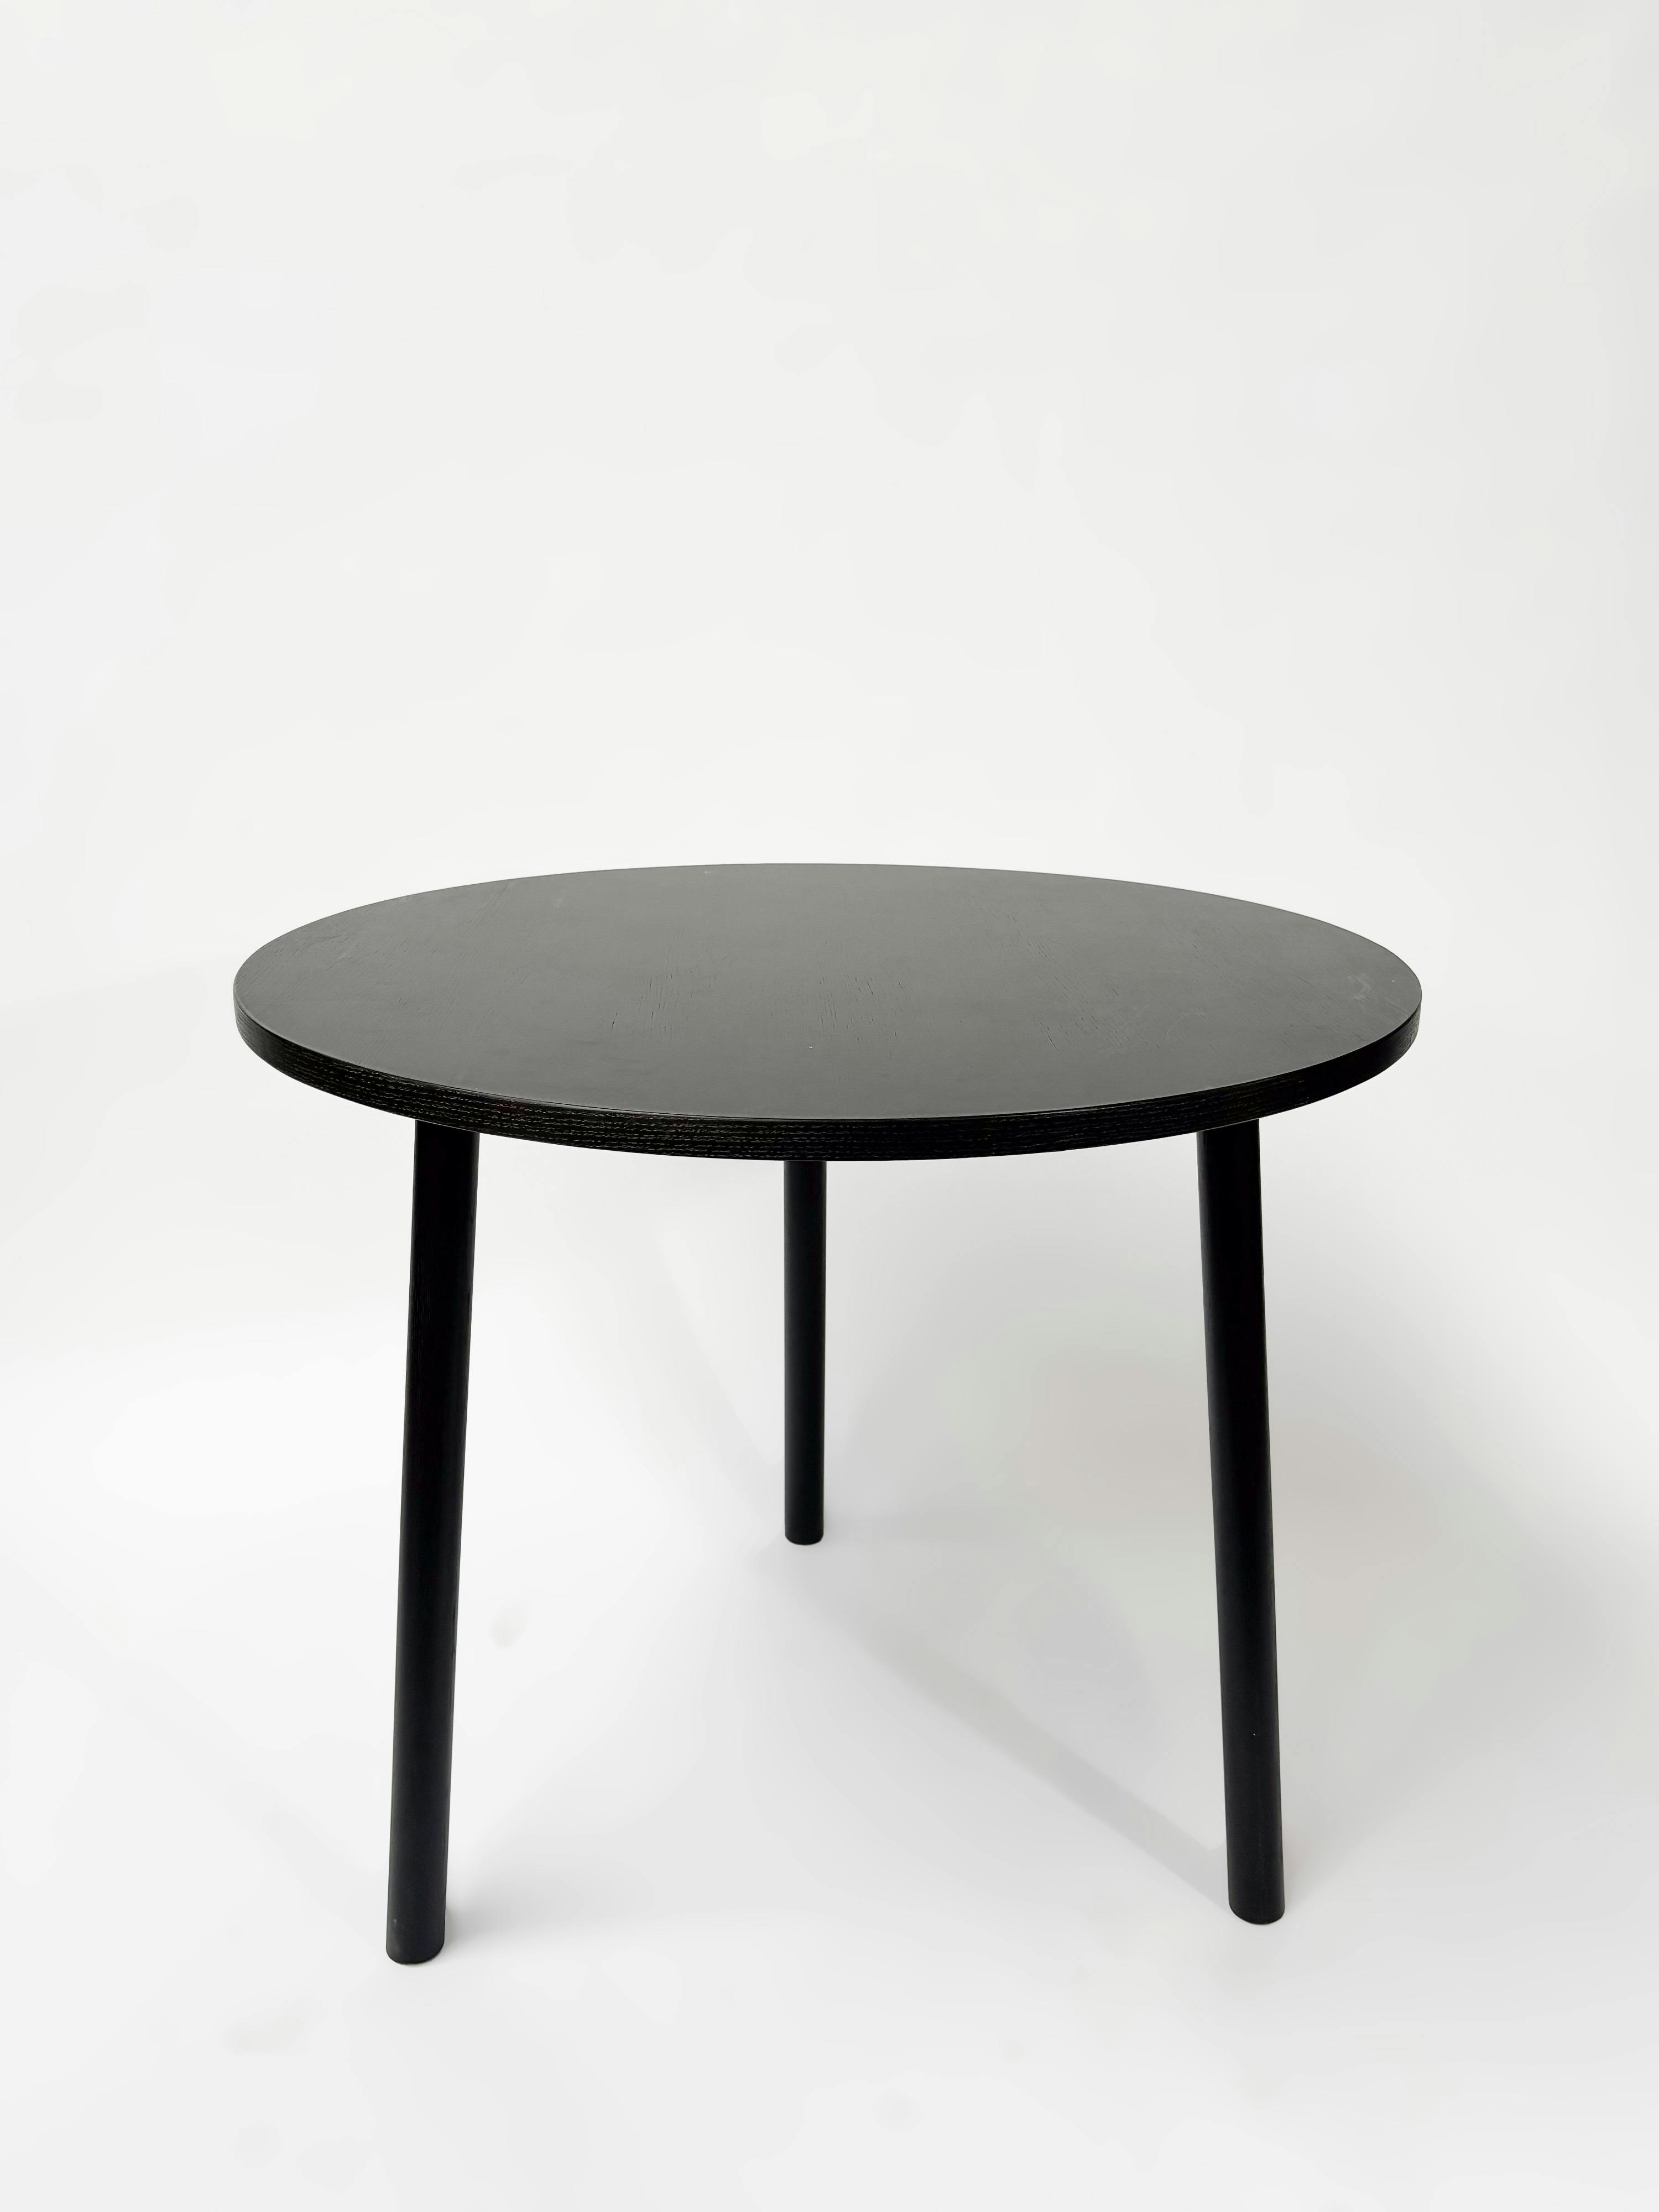 CRUSO Black Wooden Round Table - 90cm - Relieve Furniture